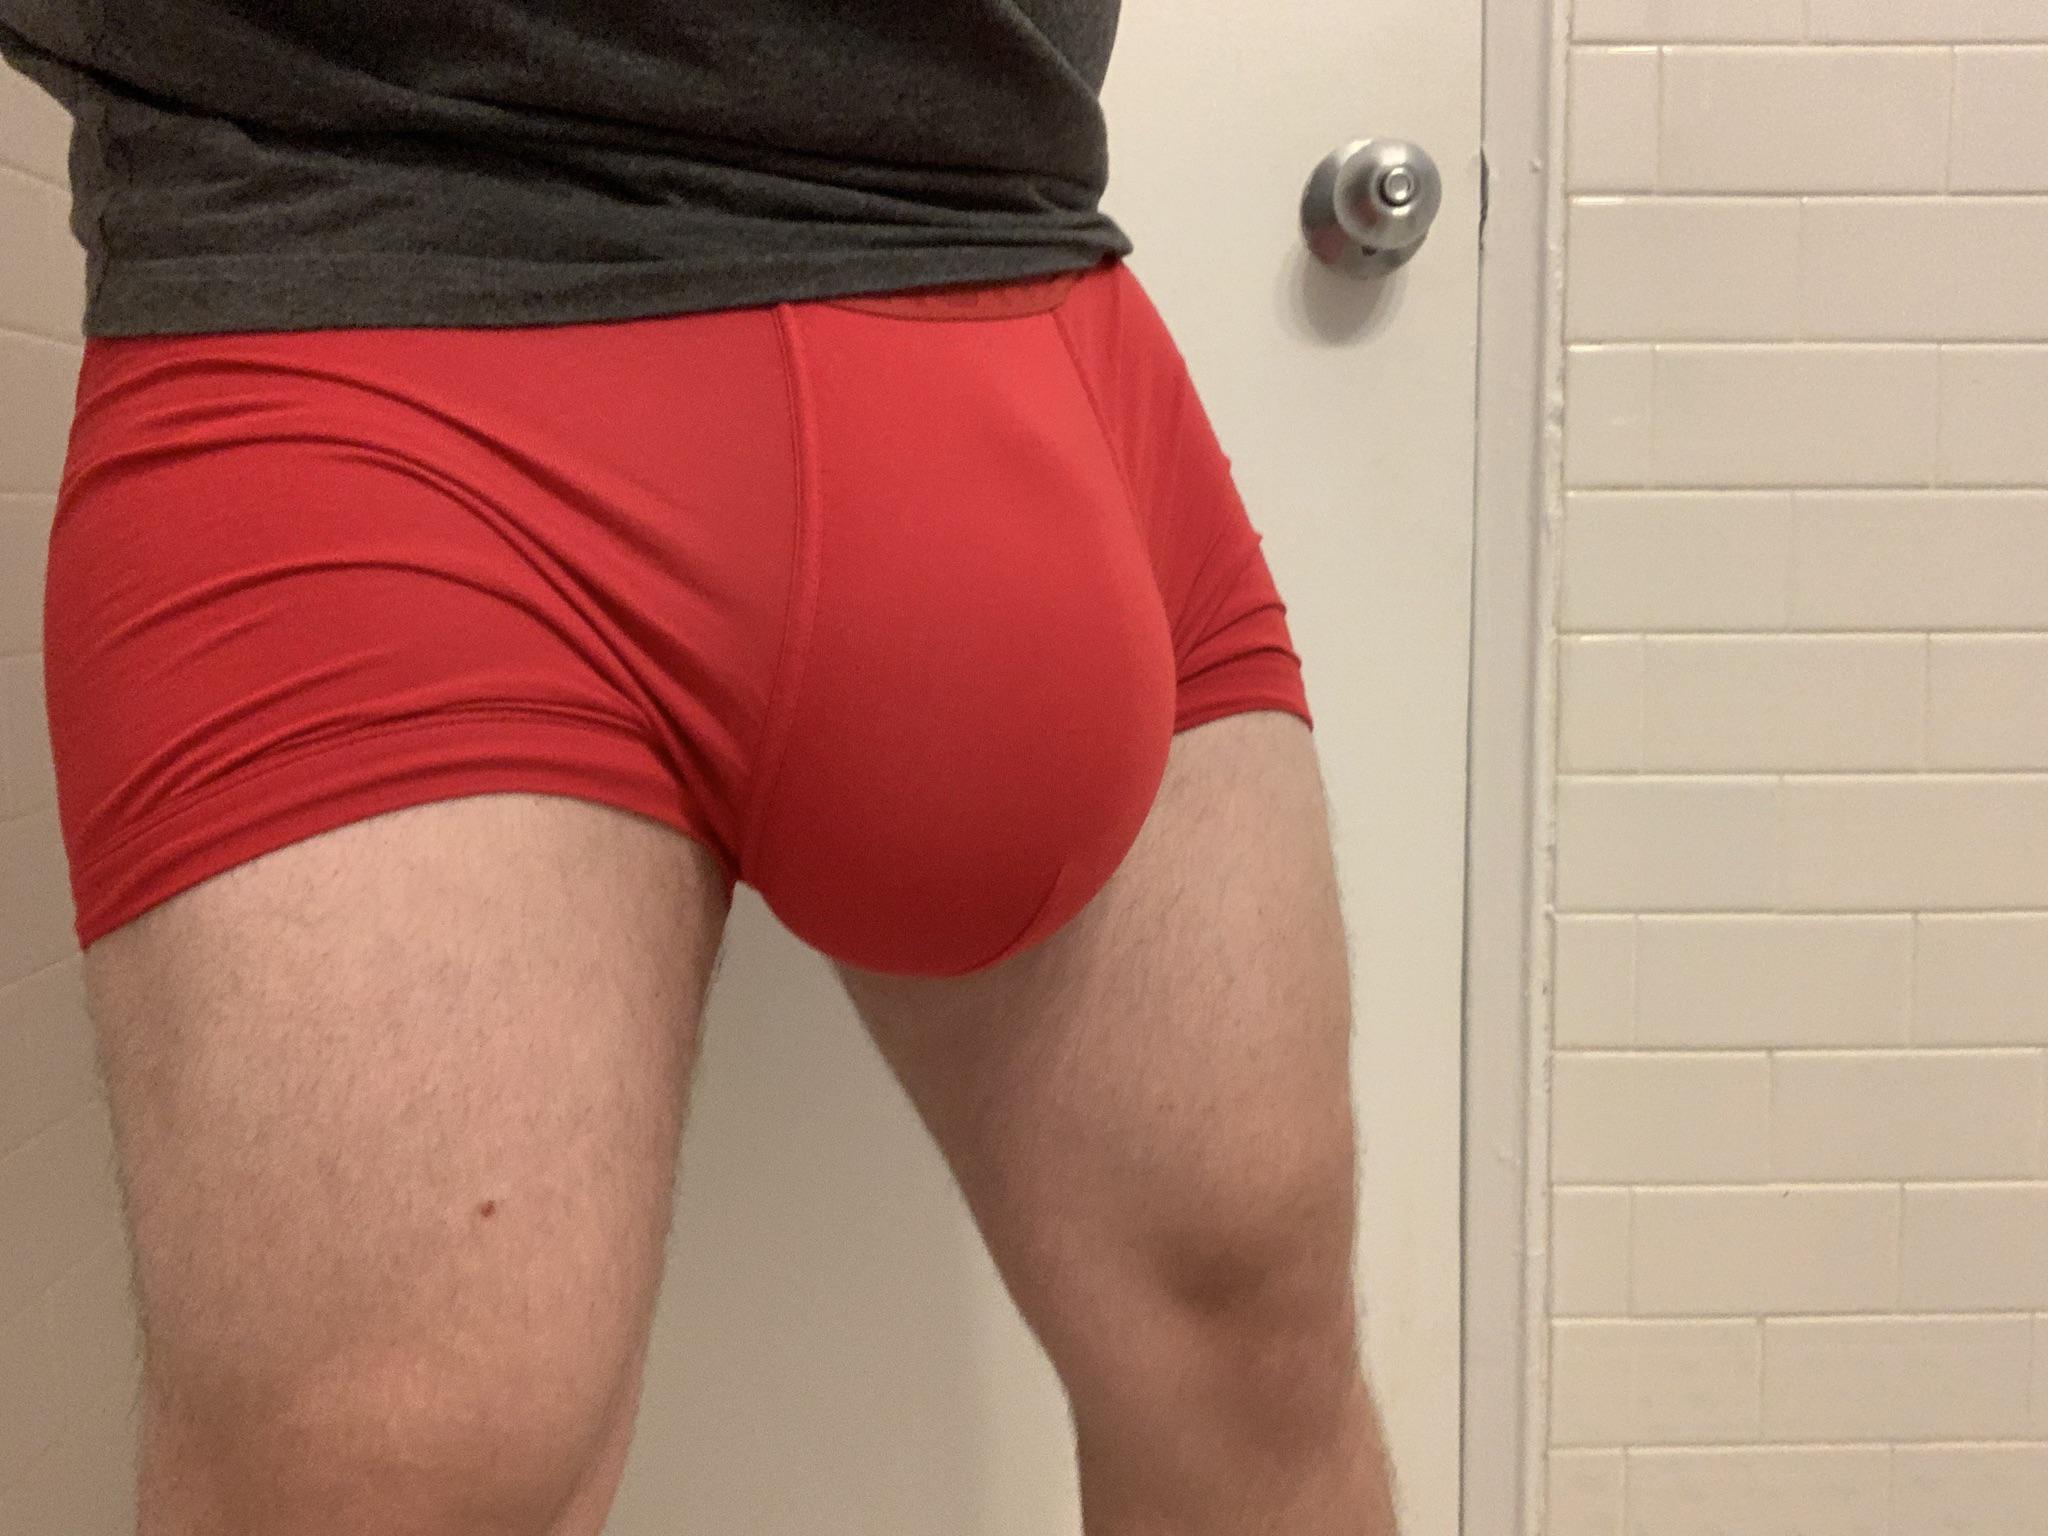 Makes for a great bulge lol